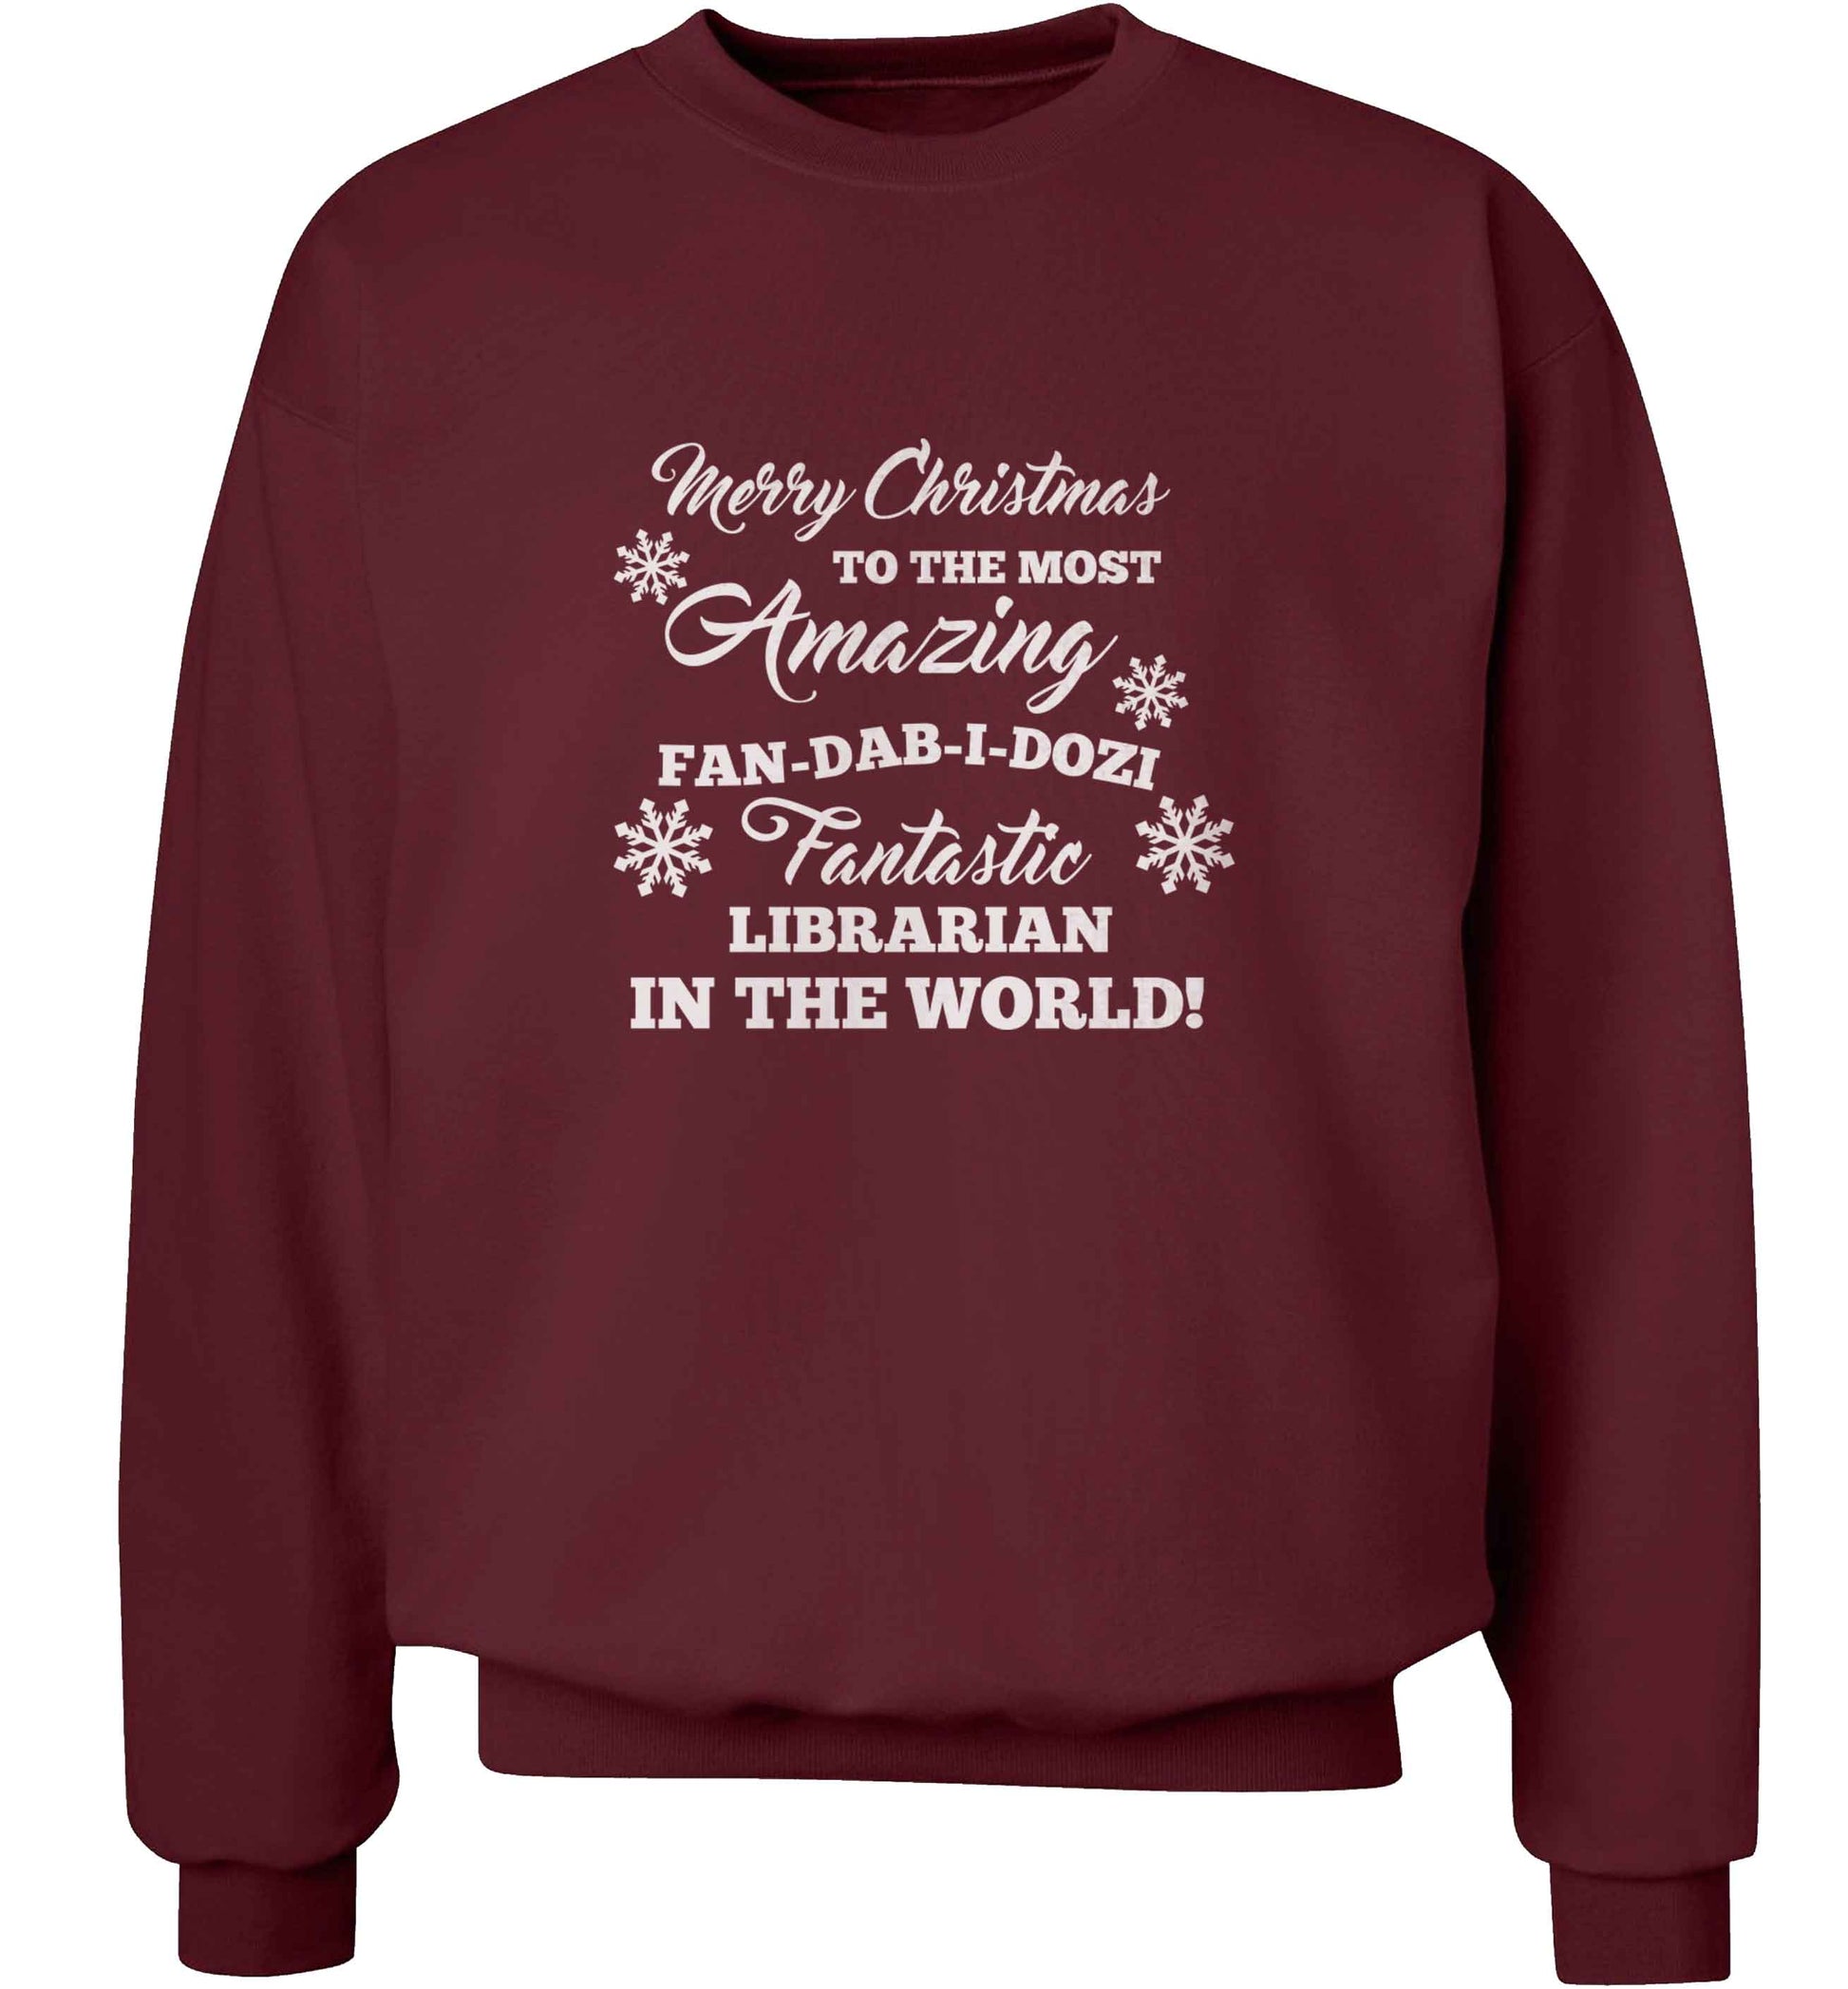 Merry Christmas to the most amazing librarian in the world! adult's unisex maroon sweater 2XL